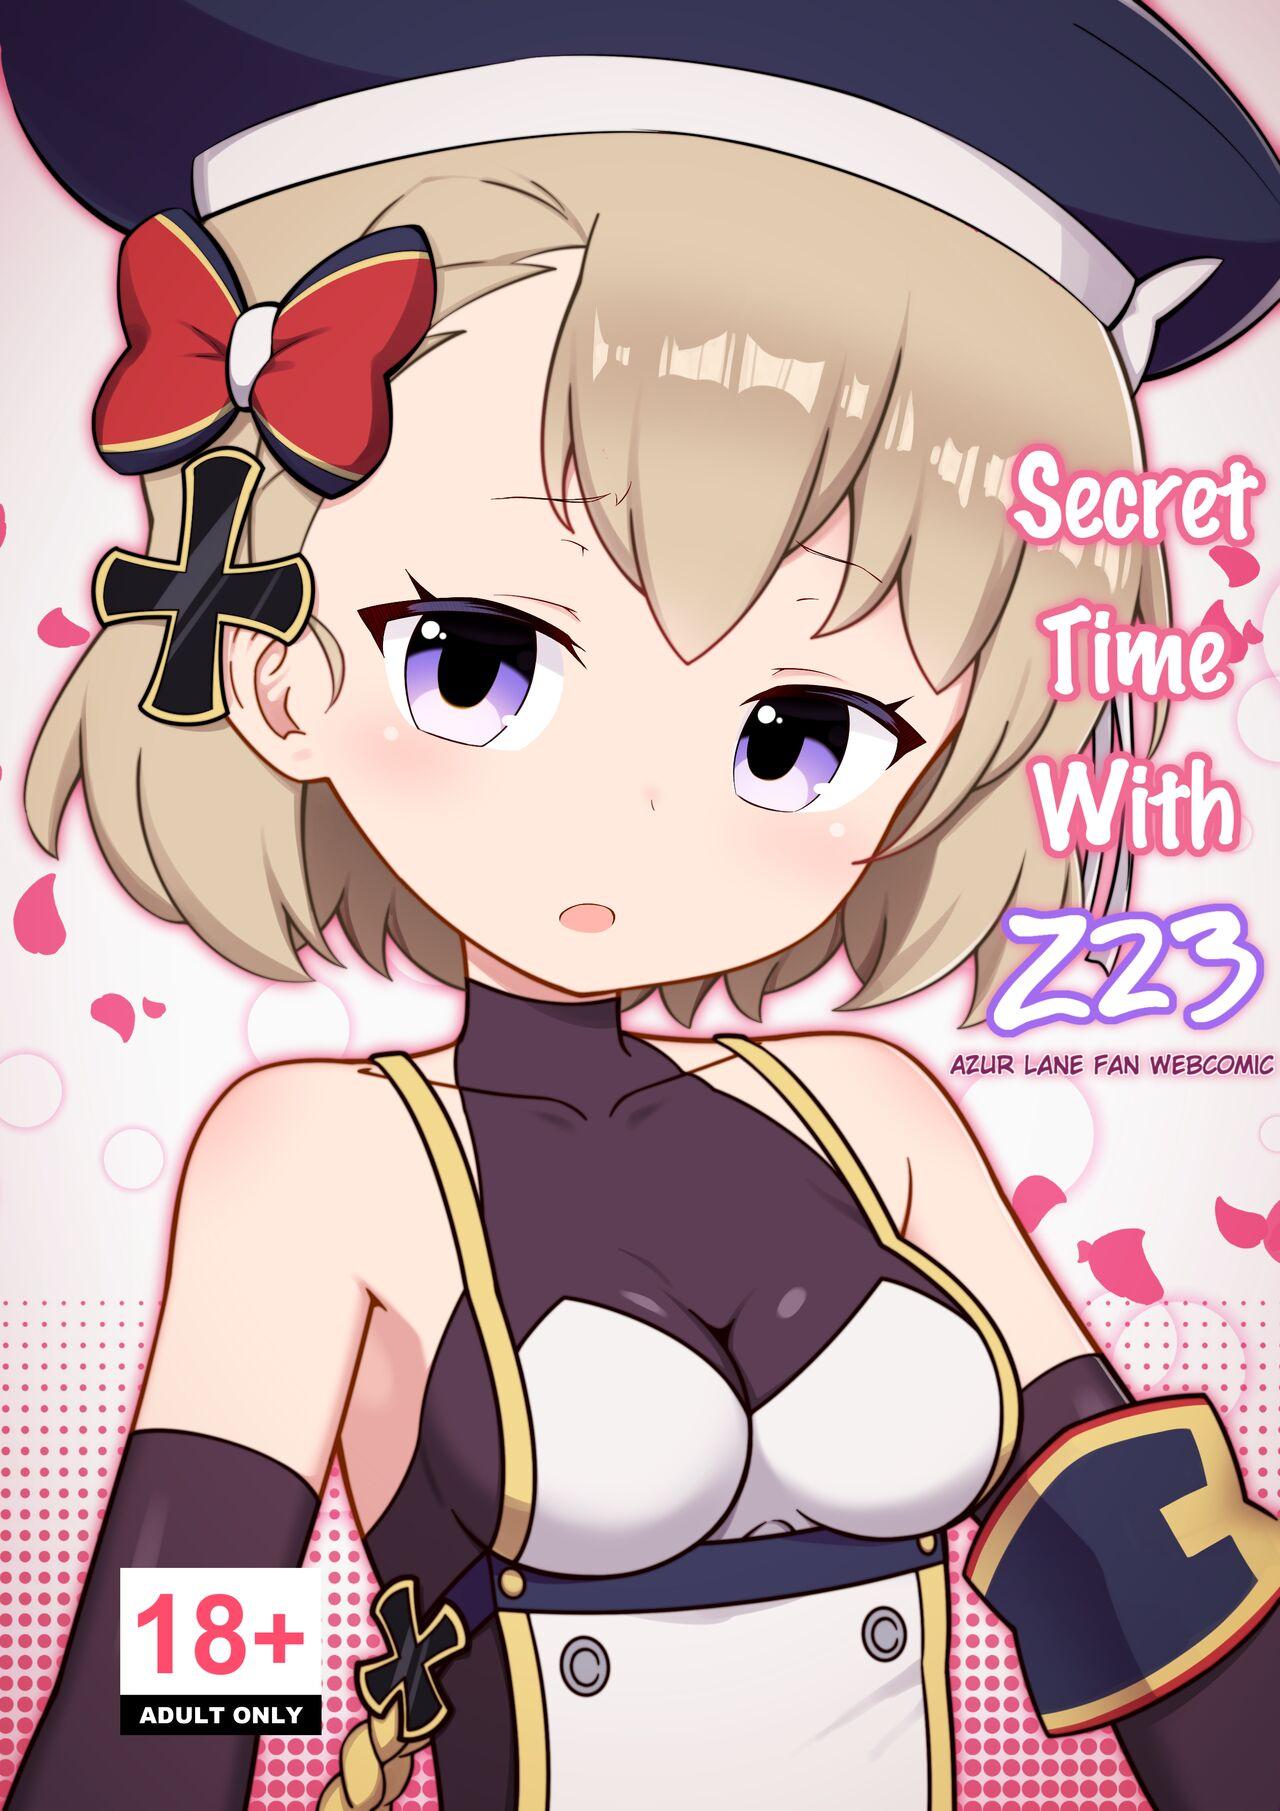 Taboo Secret Time With Z23 | 与Z23的秘密时光 - Azur lane Skype - Picture 2